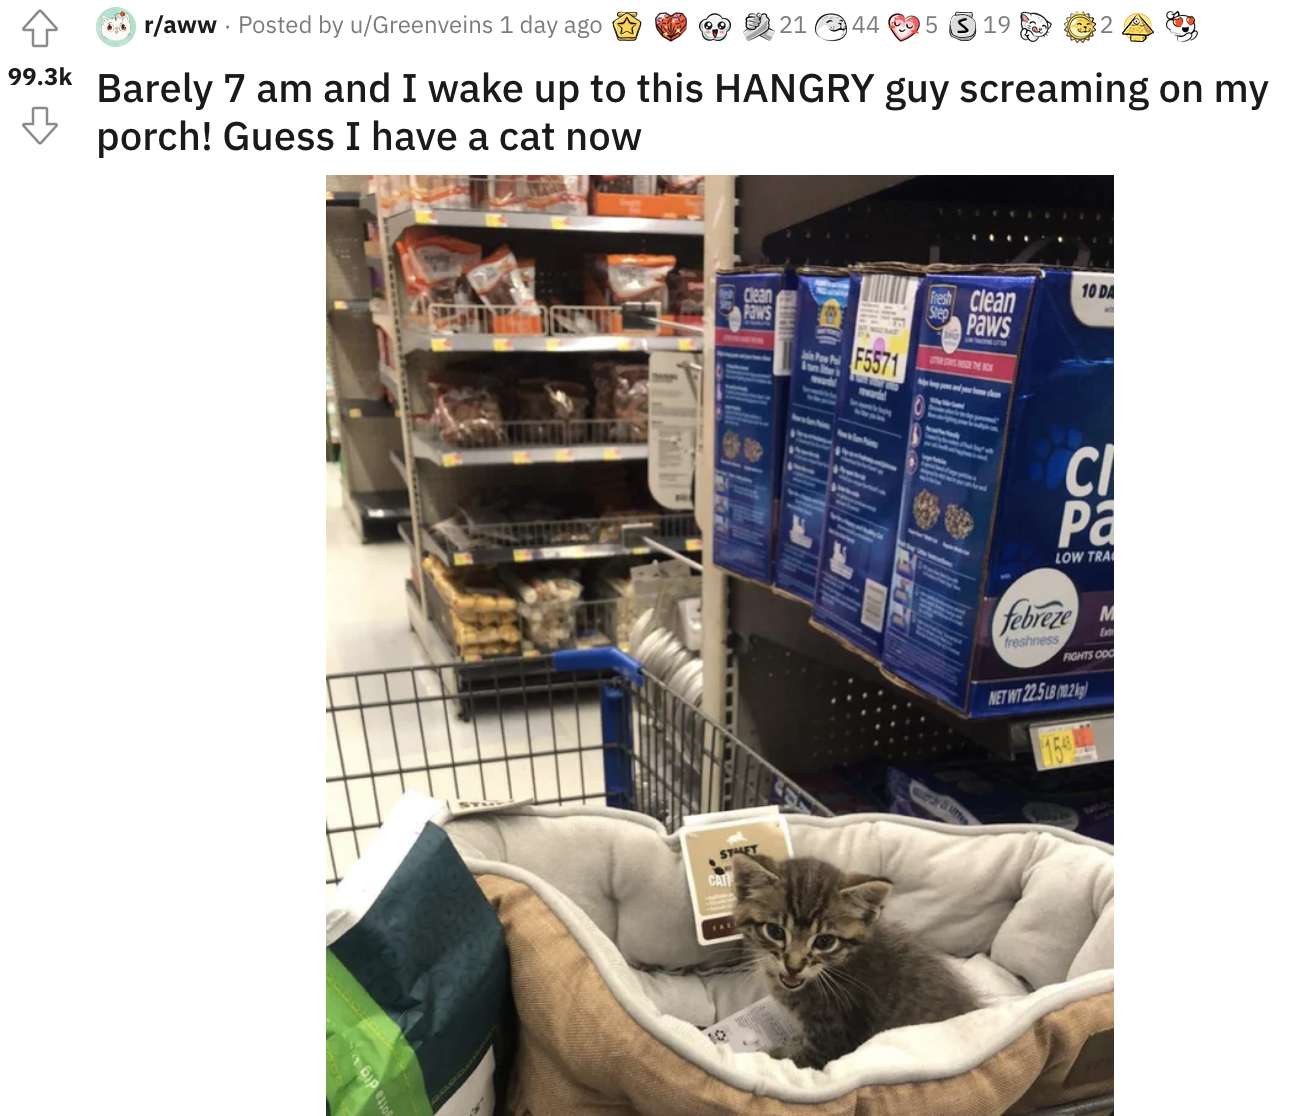 A kitten that turned up on their doorstep is sitting in a kitty couch in a shopping cart at the store